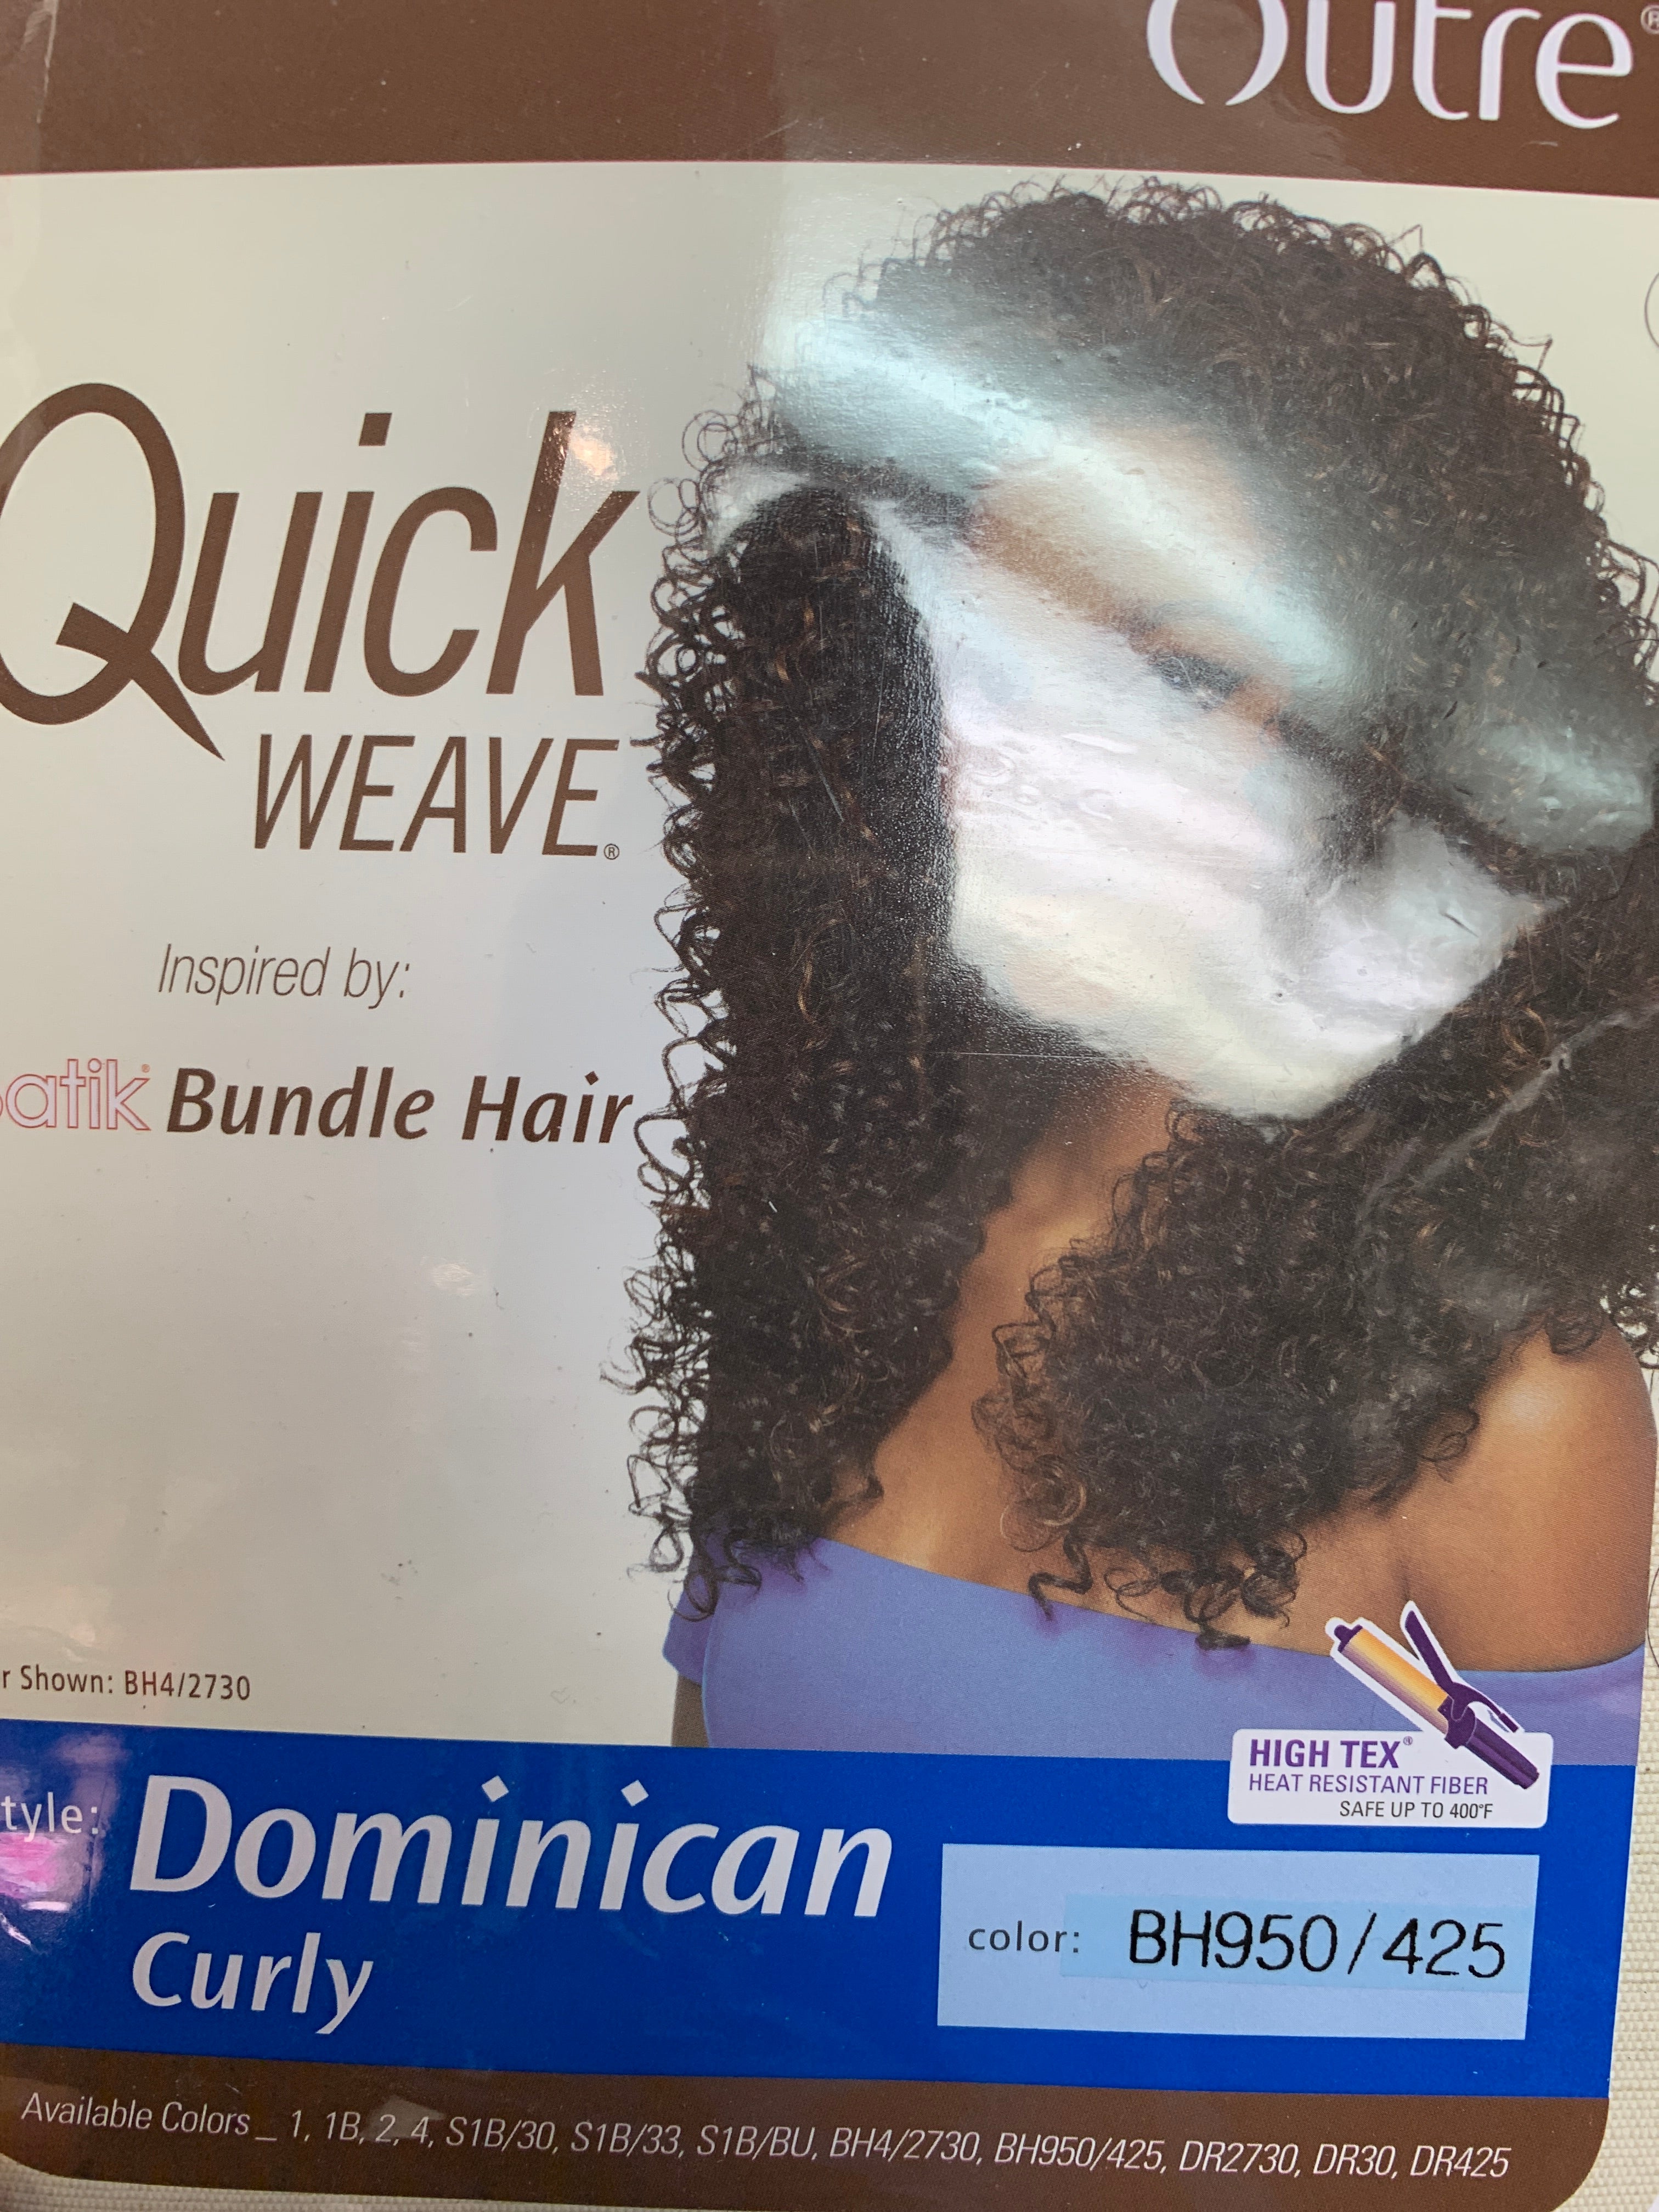 Outre Dominican curly